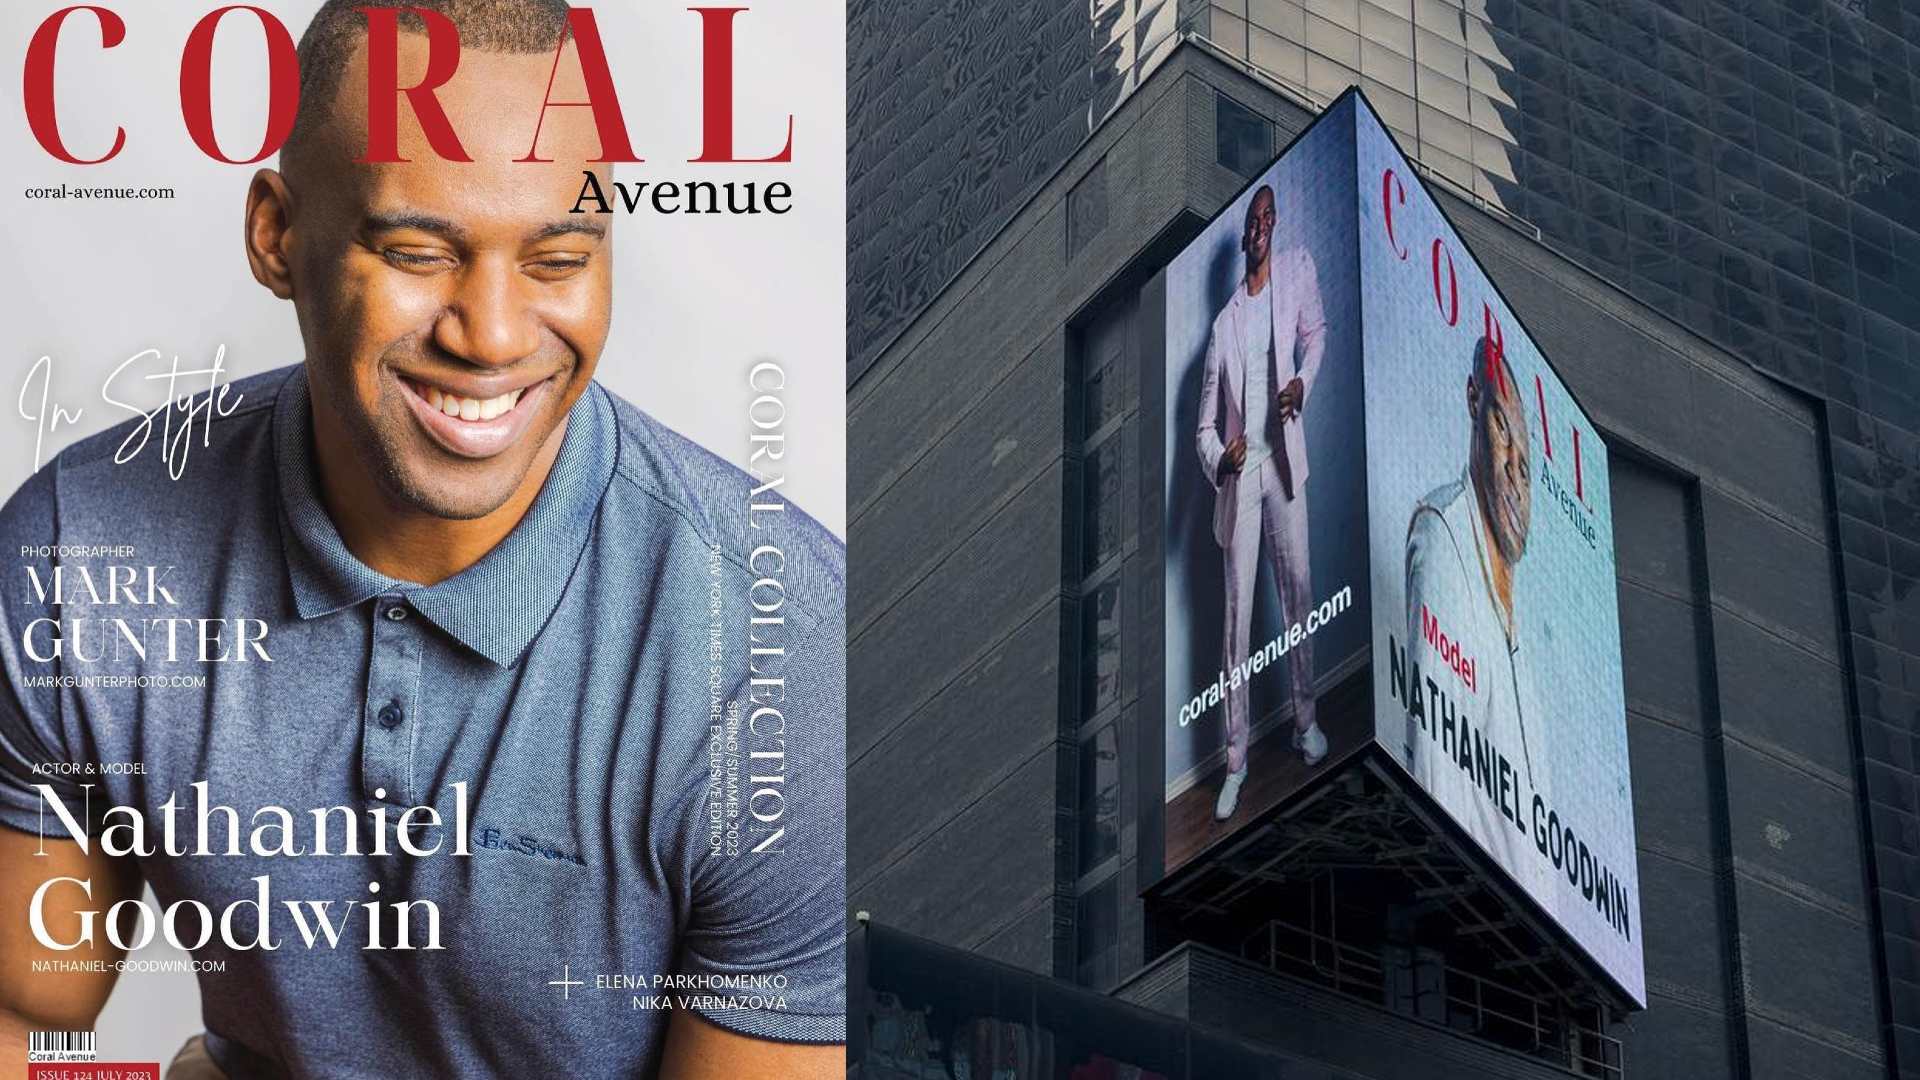 Hollywood Exclusive: Latest on Actor/Model Nathaniel Goodwin & his New York Times Billboard Feature!